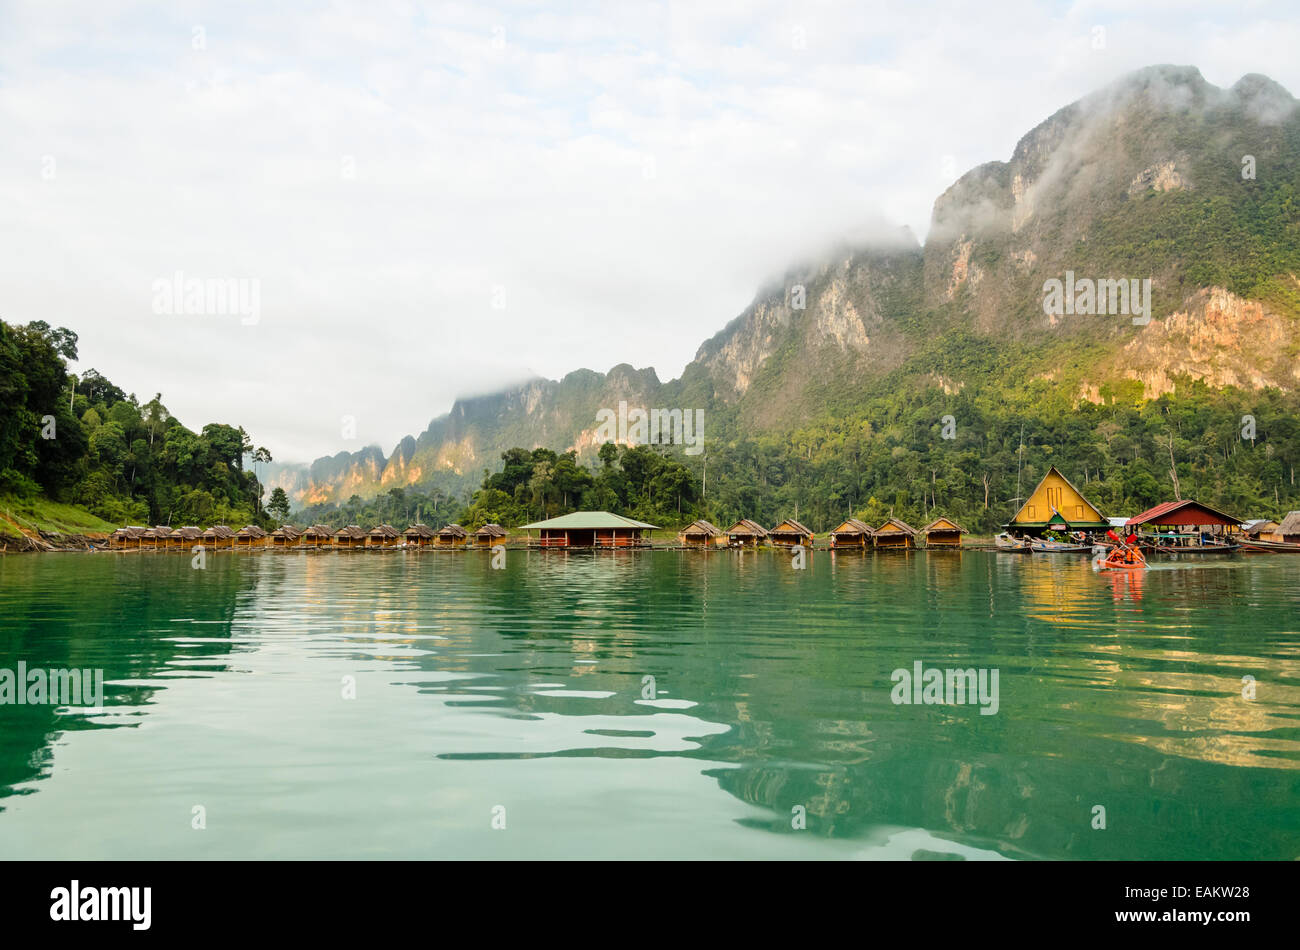 SURAT THANI, THAILAND - APR 27, 2013 : Landscapes resort natural in morning and visitors to stay overnight at Ratchaprapha Dam a Stock Photo